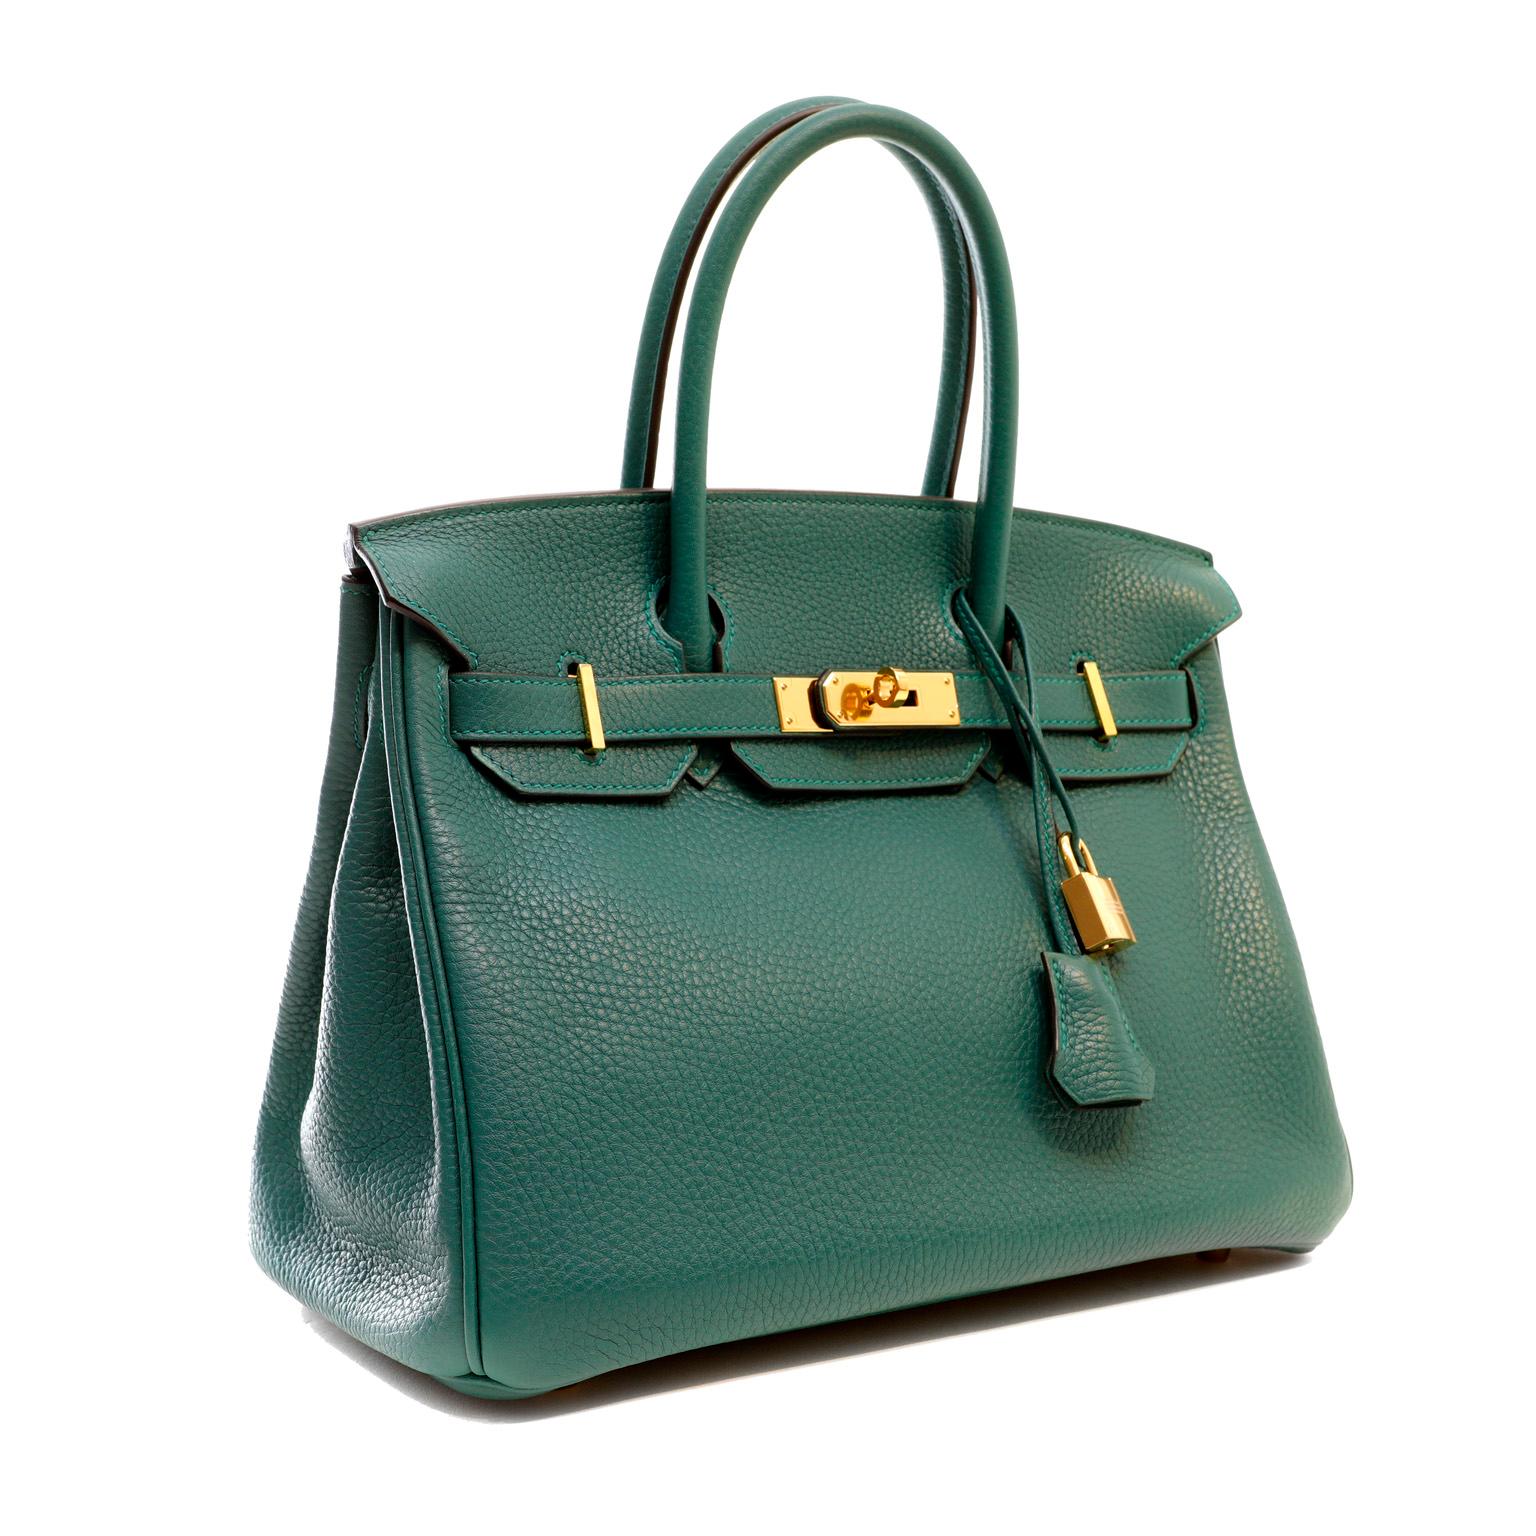 This authentic Hermès Jade Green Togo 30 cm Birkin is in pristine unwormn condition with the protective plastic intact on the hardware.  Hand stitched by skilled craftsmen, wait lists of a year or more are commonplace for the Hermès Birkin. Jewel